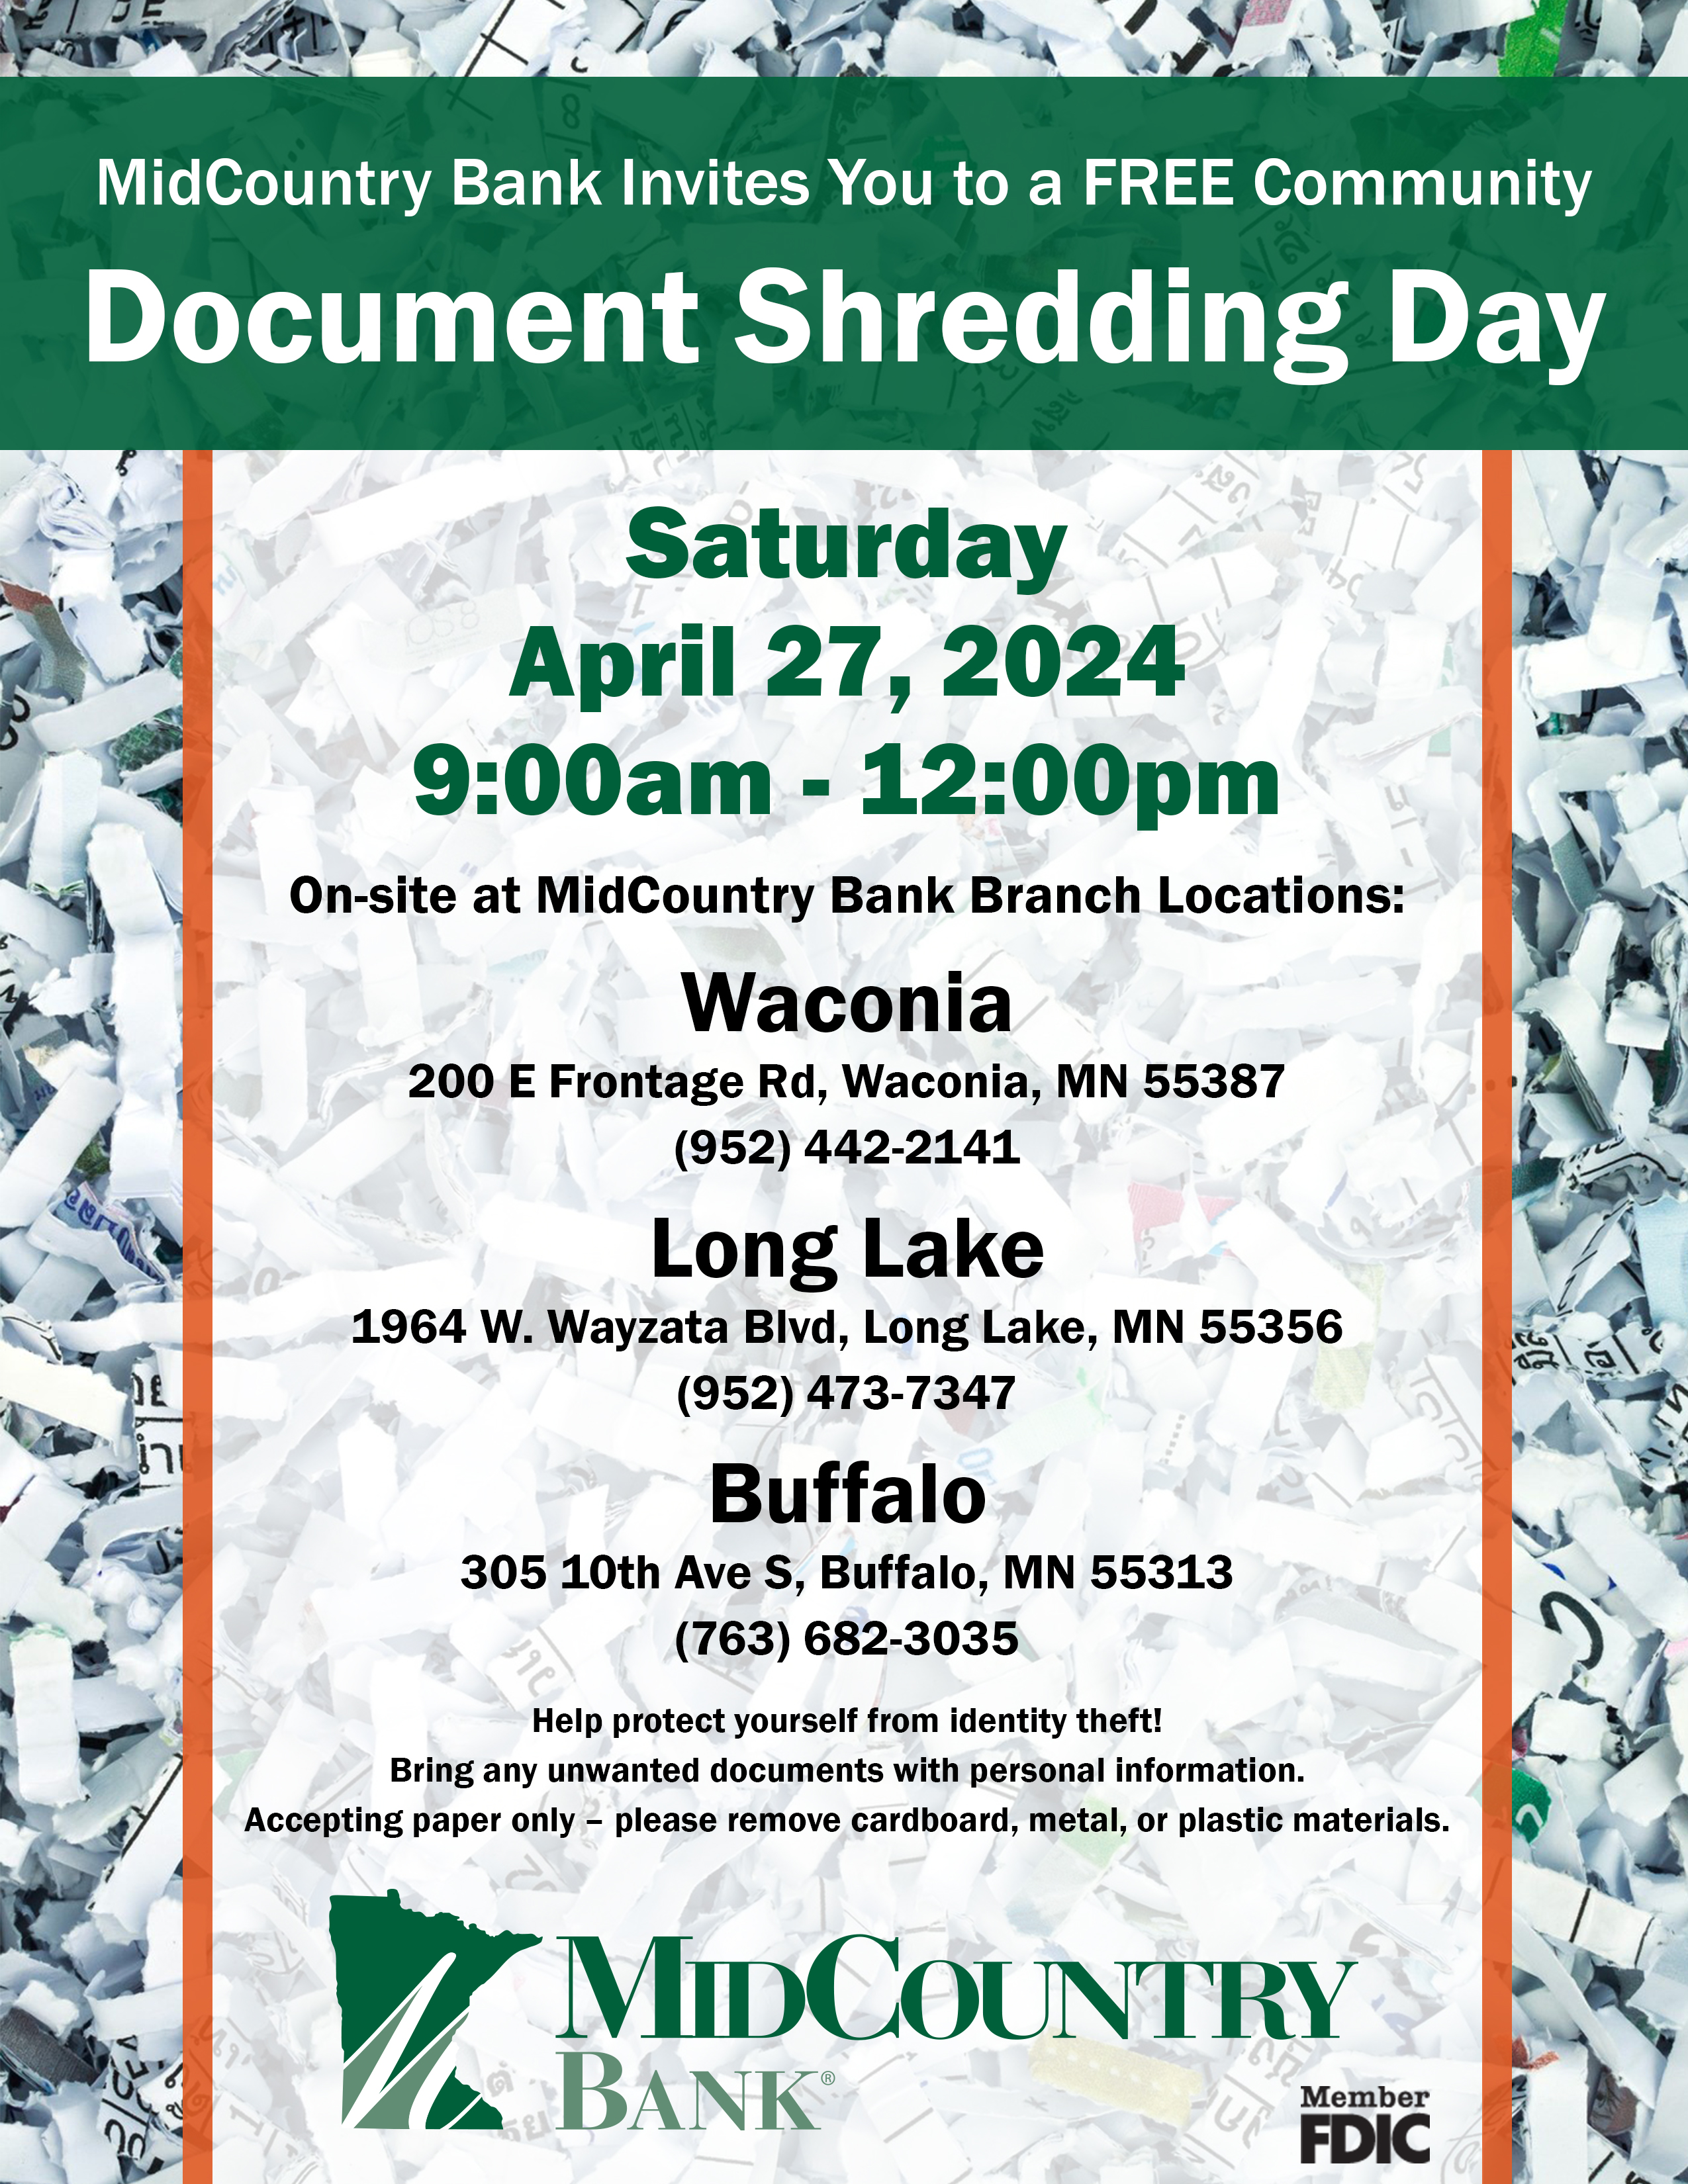 MidCountry Bank Invites You to a FREE Community Document Shredding Day